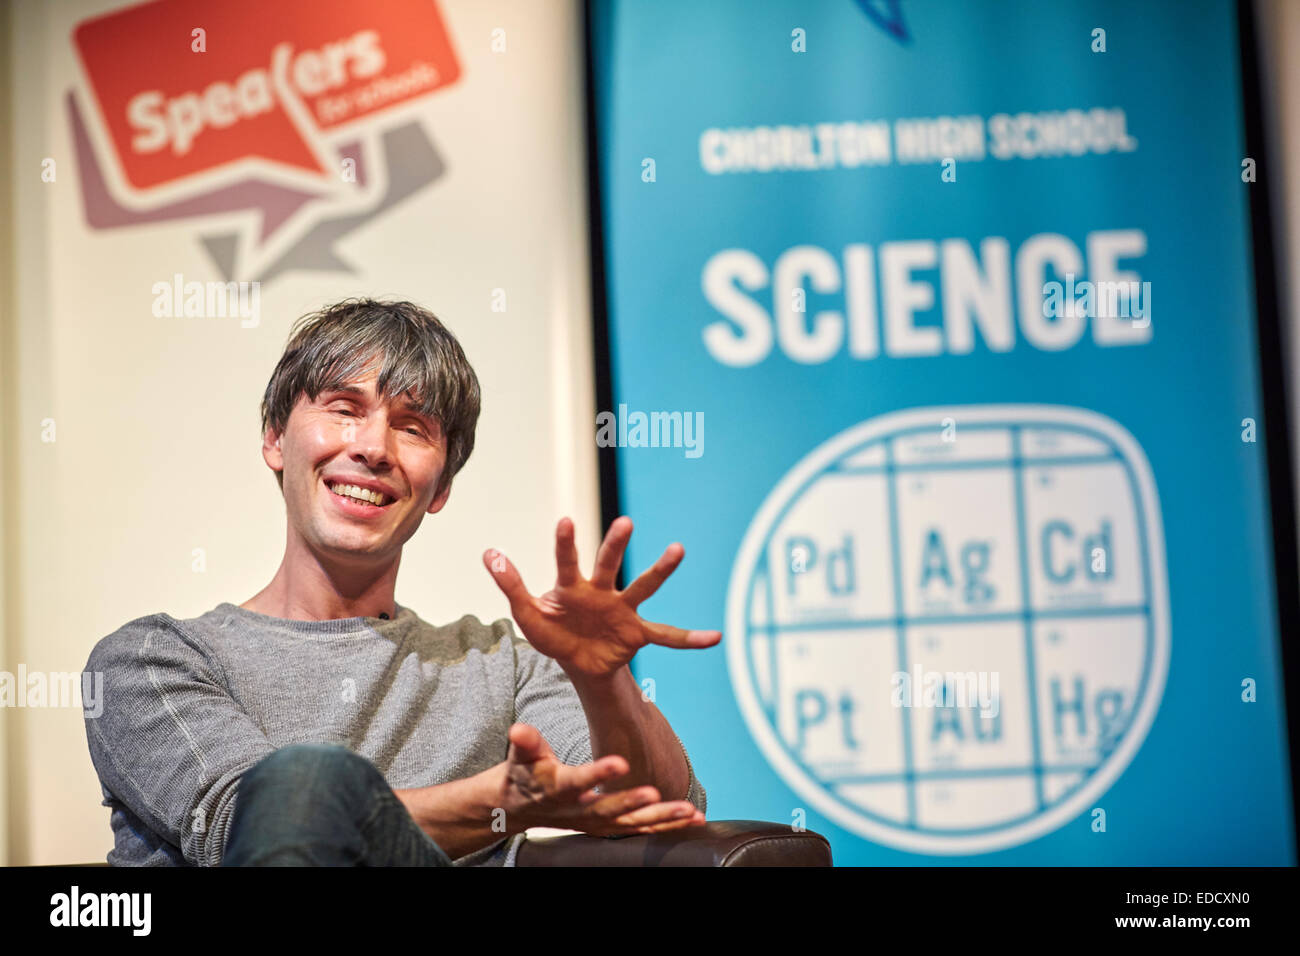 Prof Brian Cox presents a science question and answer by Speakers for Schools filmed live at Chorlton High School, and broadcast Stock Photo